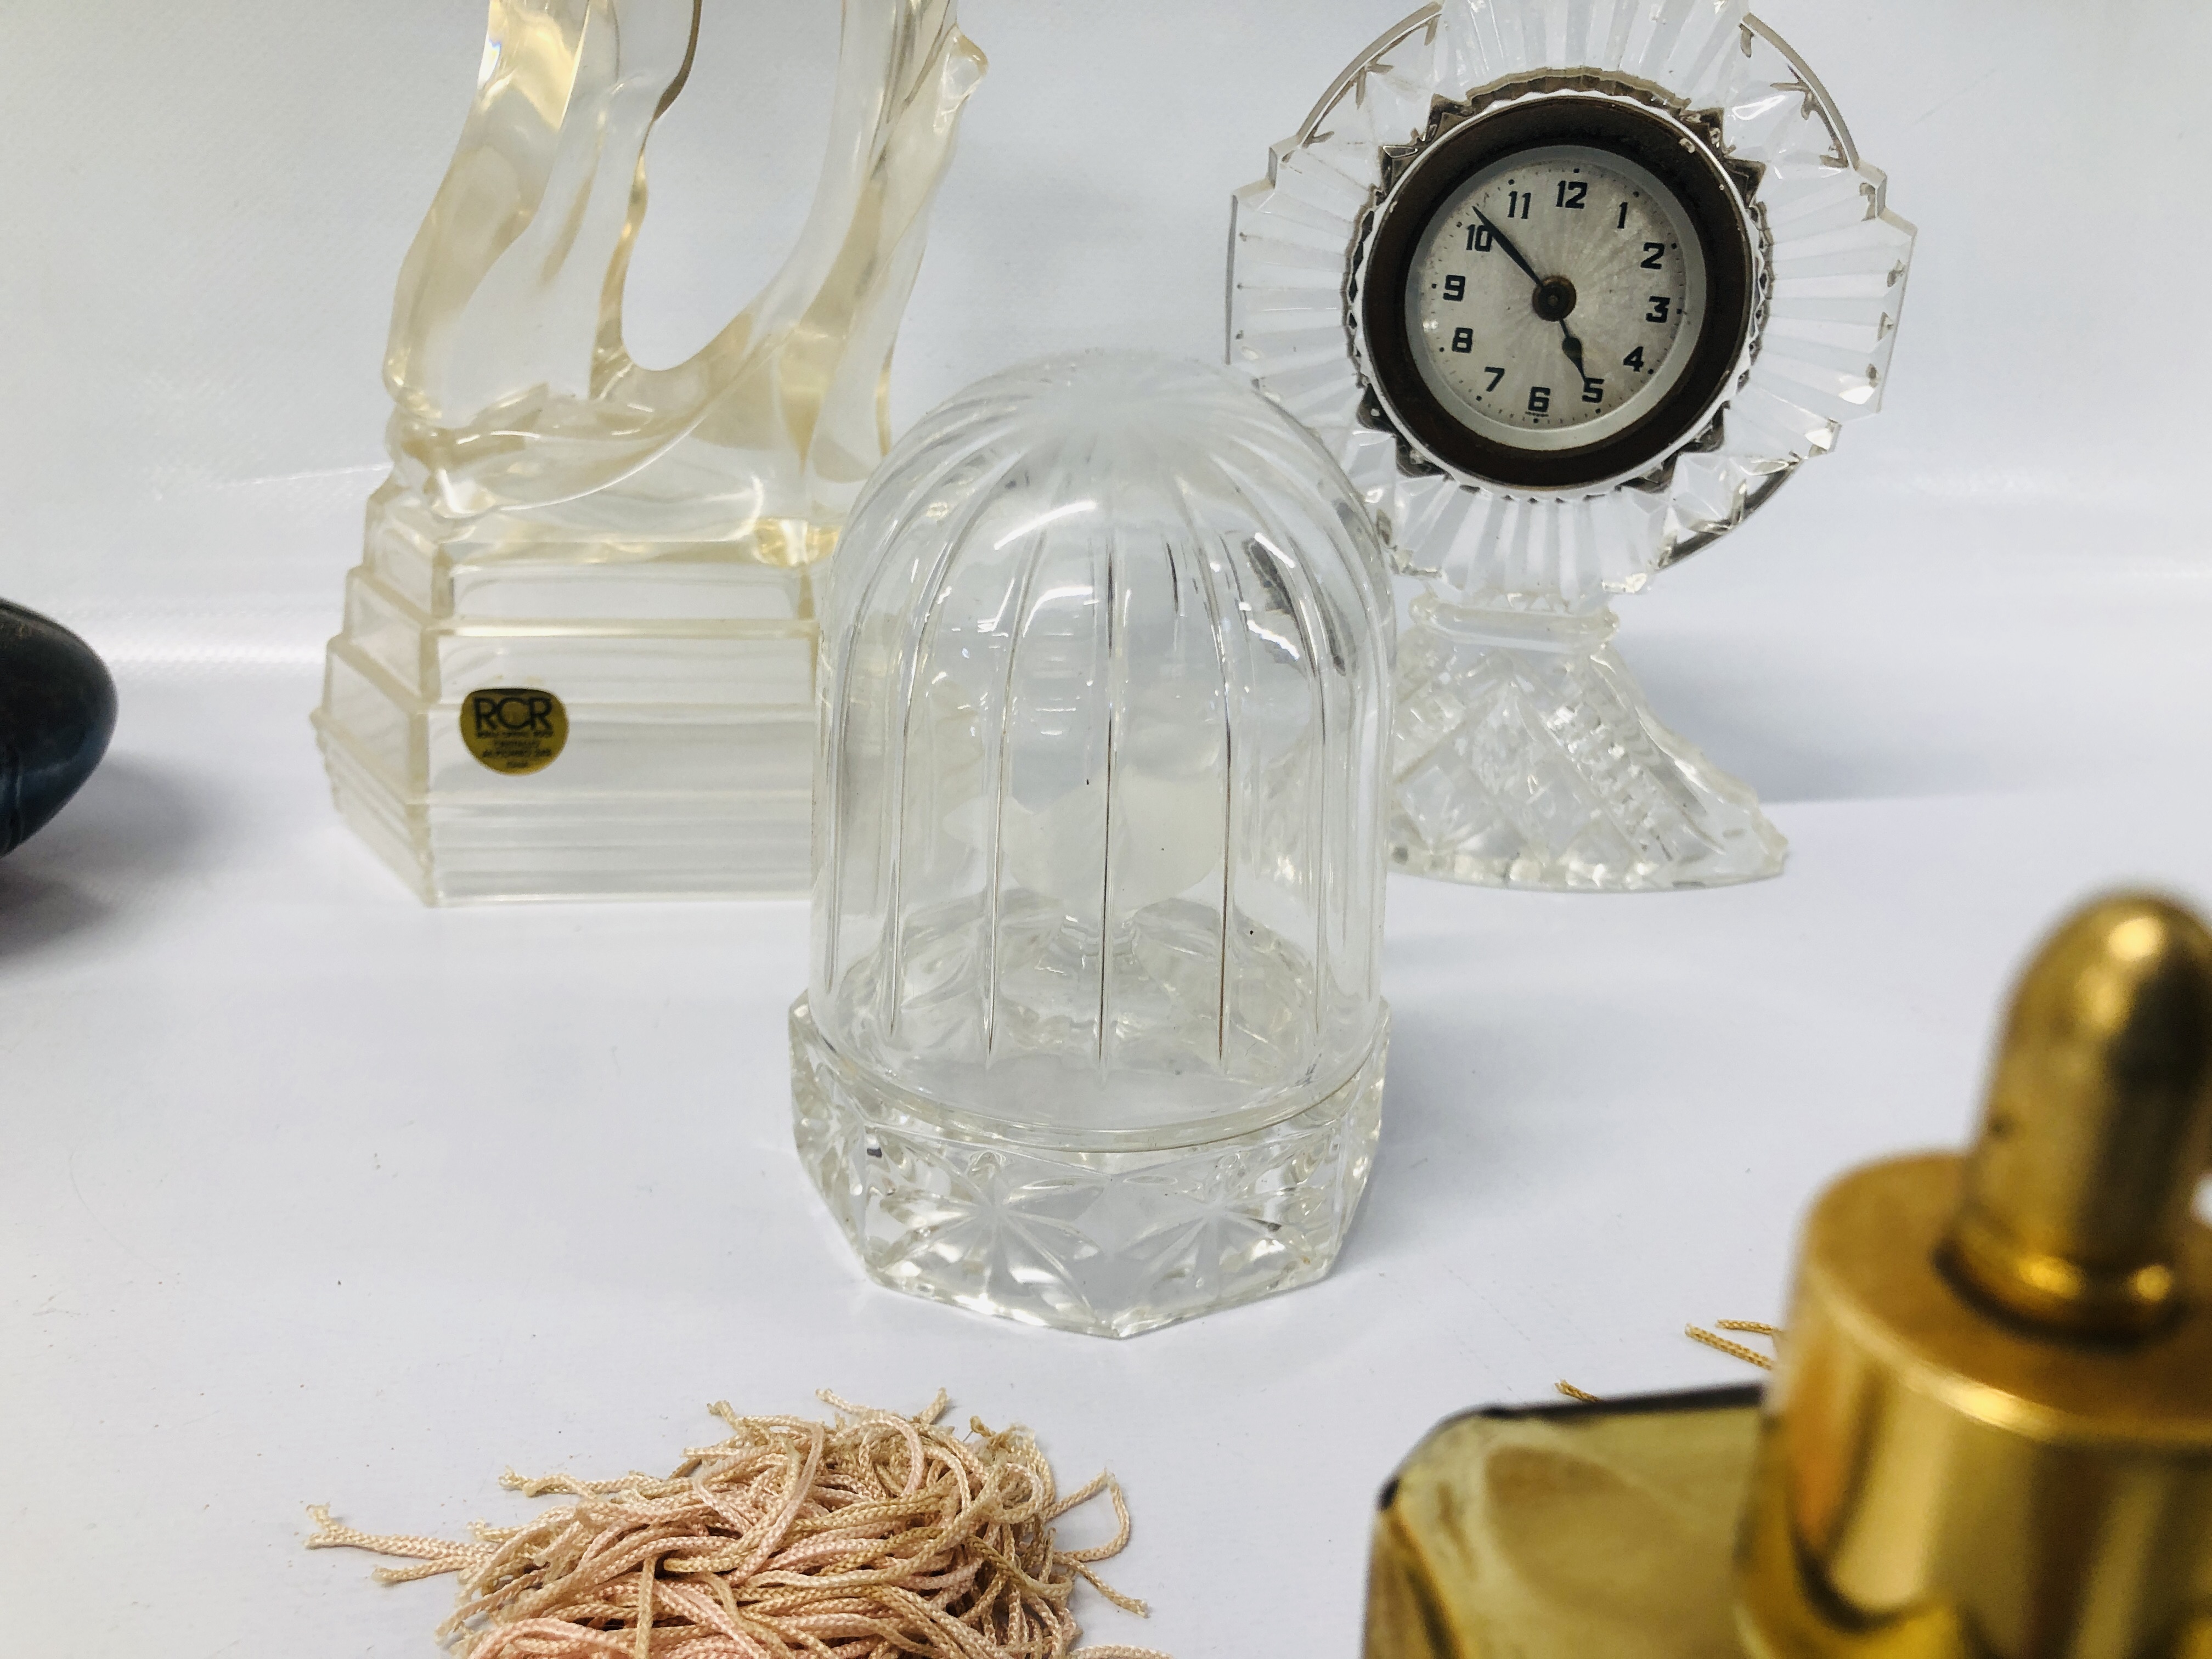 6 X ASSORTED PERFUME BOTTLES, RCR CRYSTAL DANCING GROUP, VINTAGE GLASS DRESSING TABLE CLOCK, ETC. - Image 7 of 12